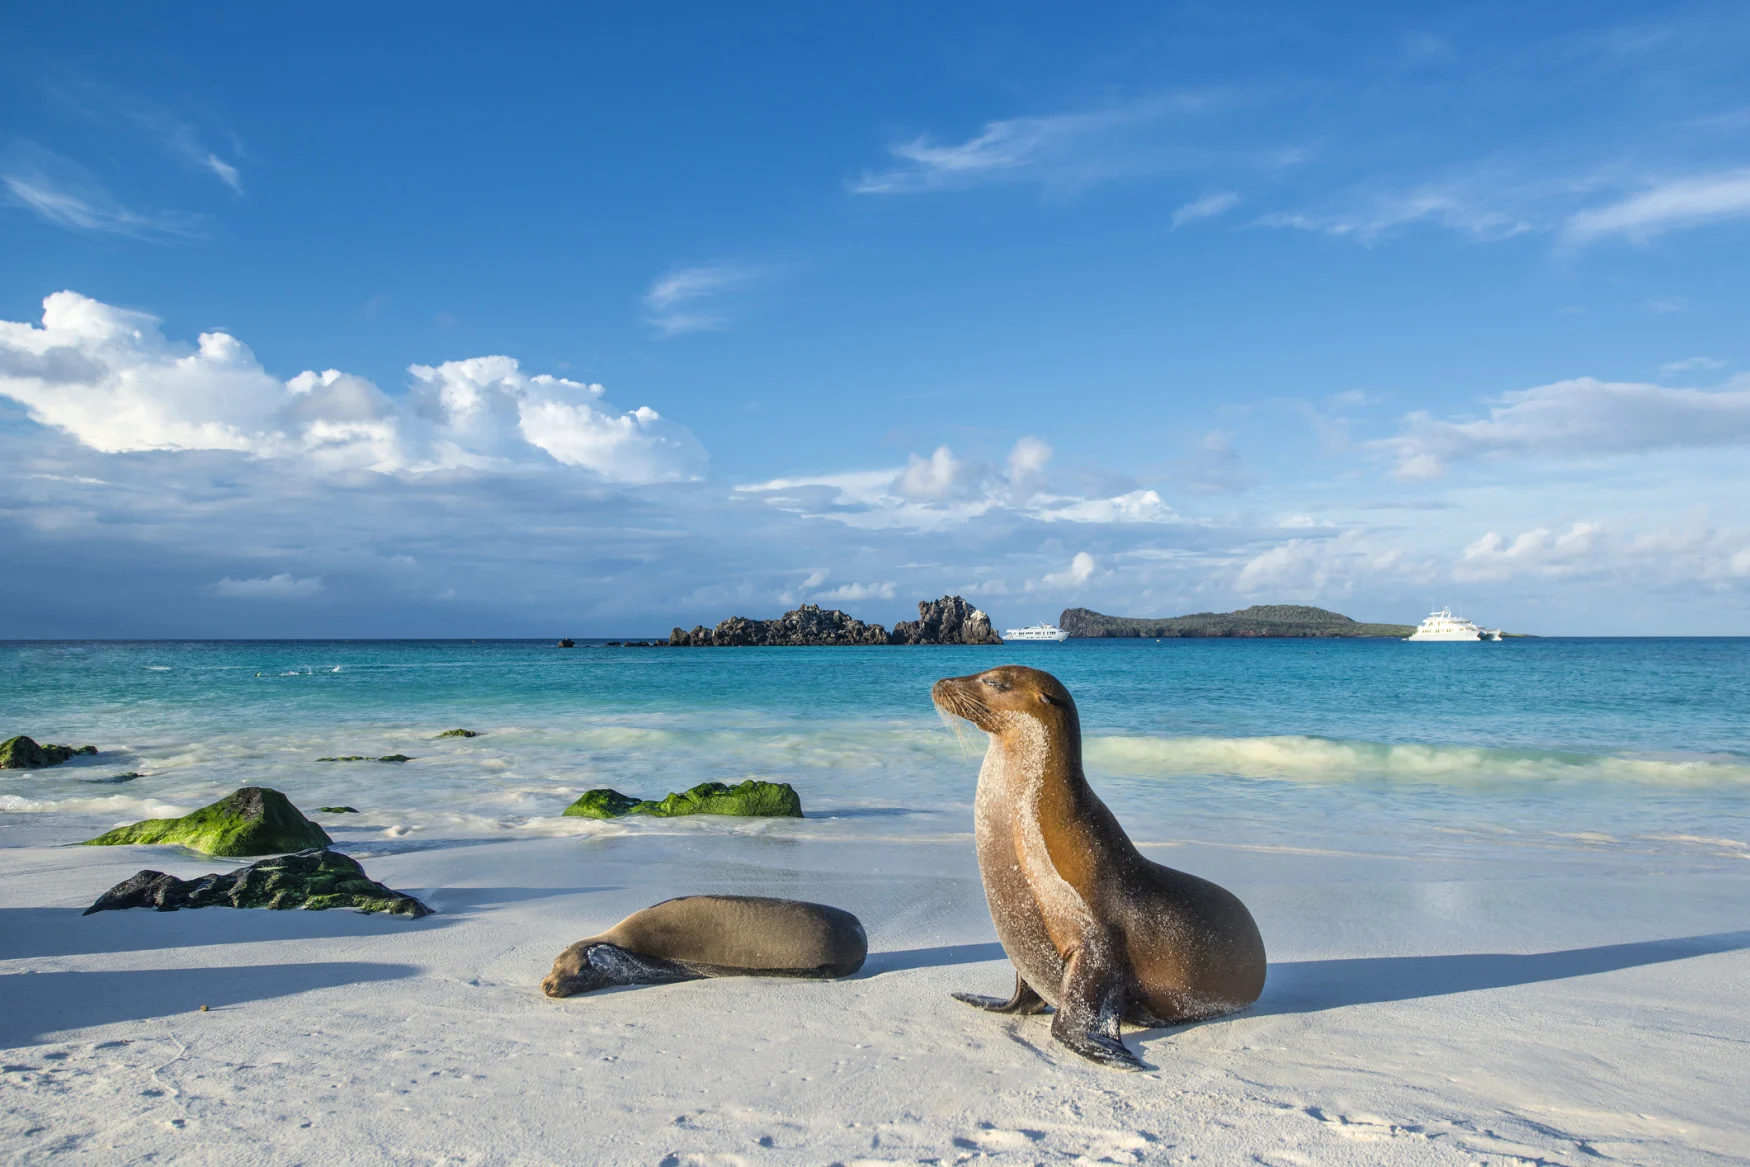 Protected areas around Galapagos islands expanded by Ecuador government